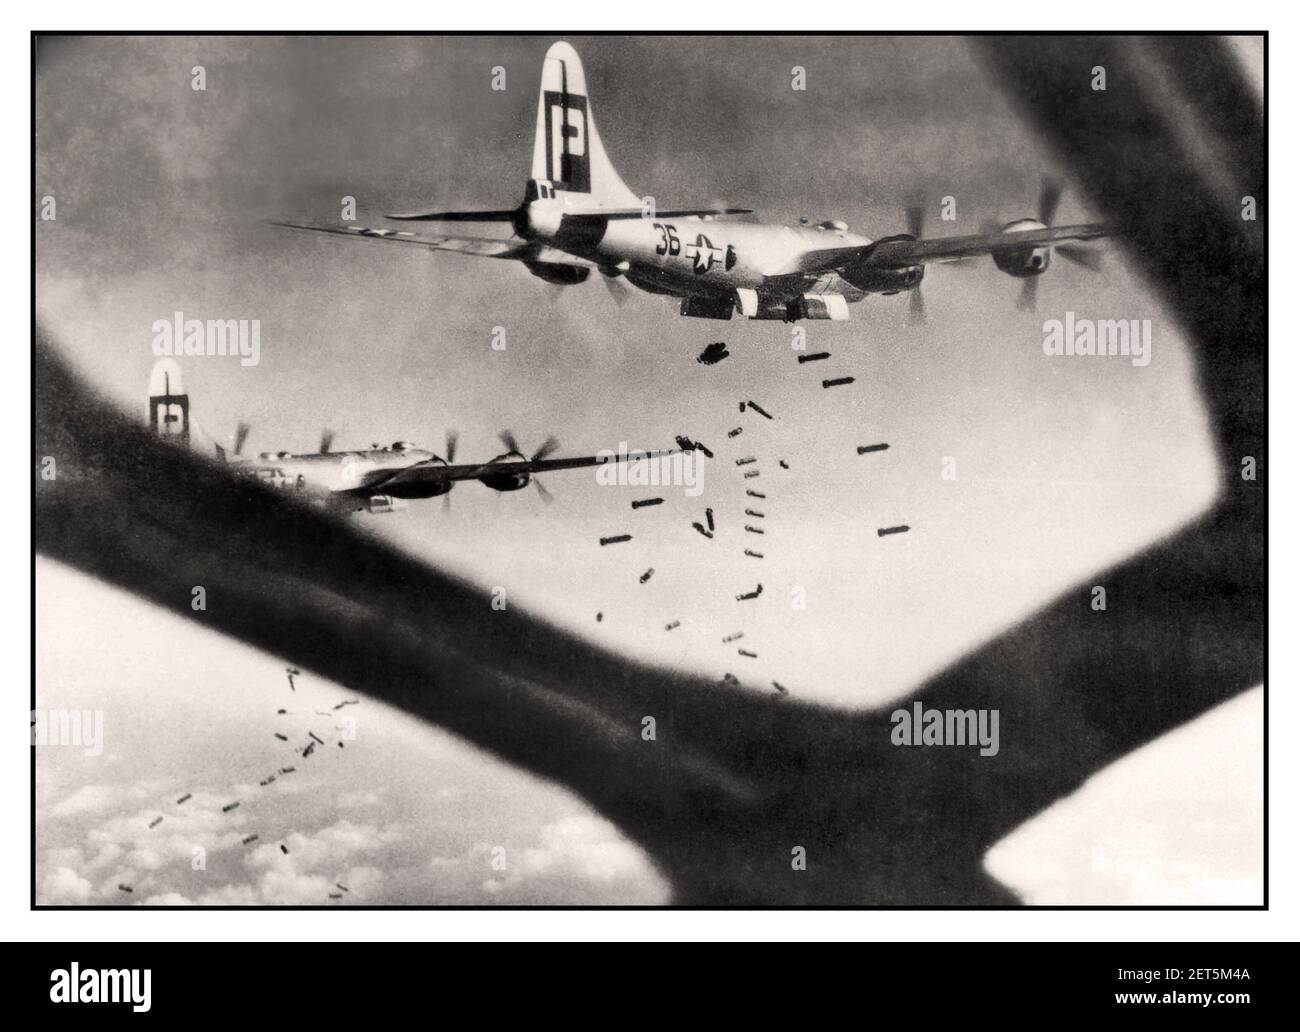 WW2 B-29 bombers on a bombing run over Hiratsuka Japan viewed through from bomb aiming nose cone window July 16, 1945 view of two 39th Bomb Group B-29s out of North Field (Andersen) on a mission over Japan. World War II Second World War Pacific War Stock Photo